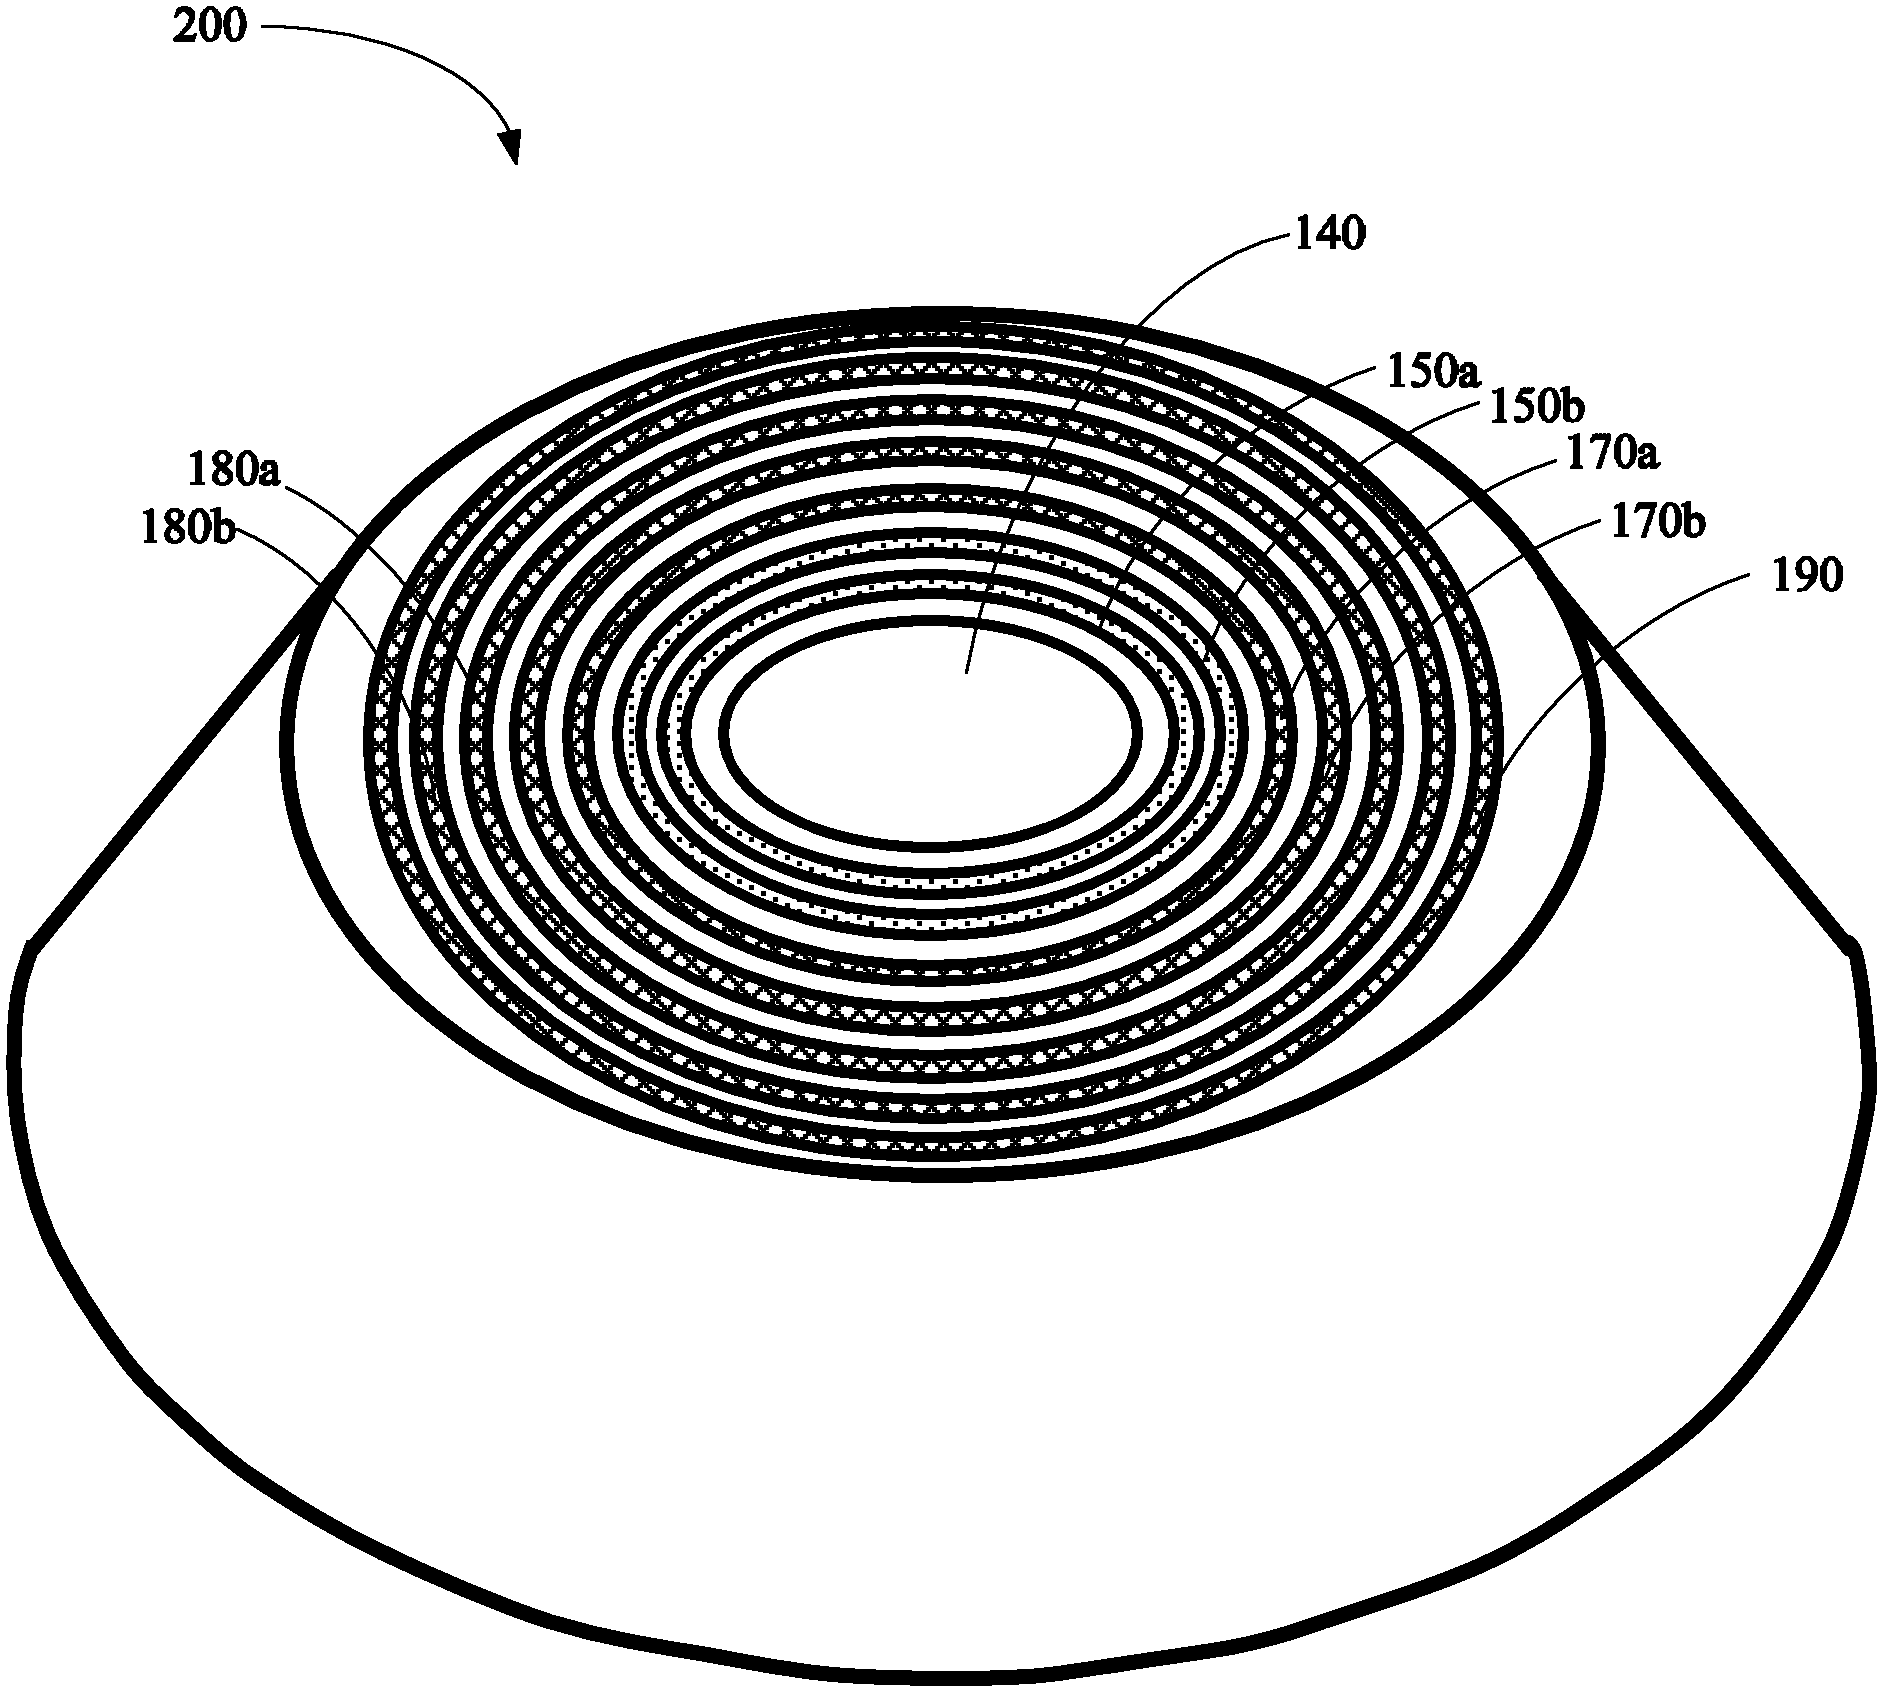 Projection system of immersed photolithography system